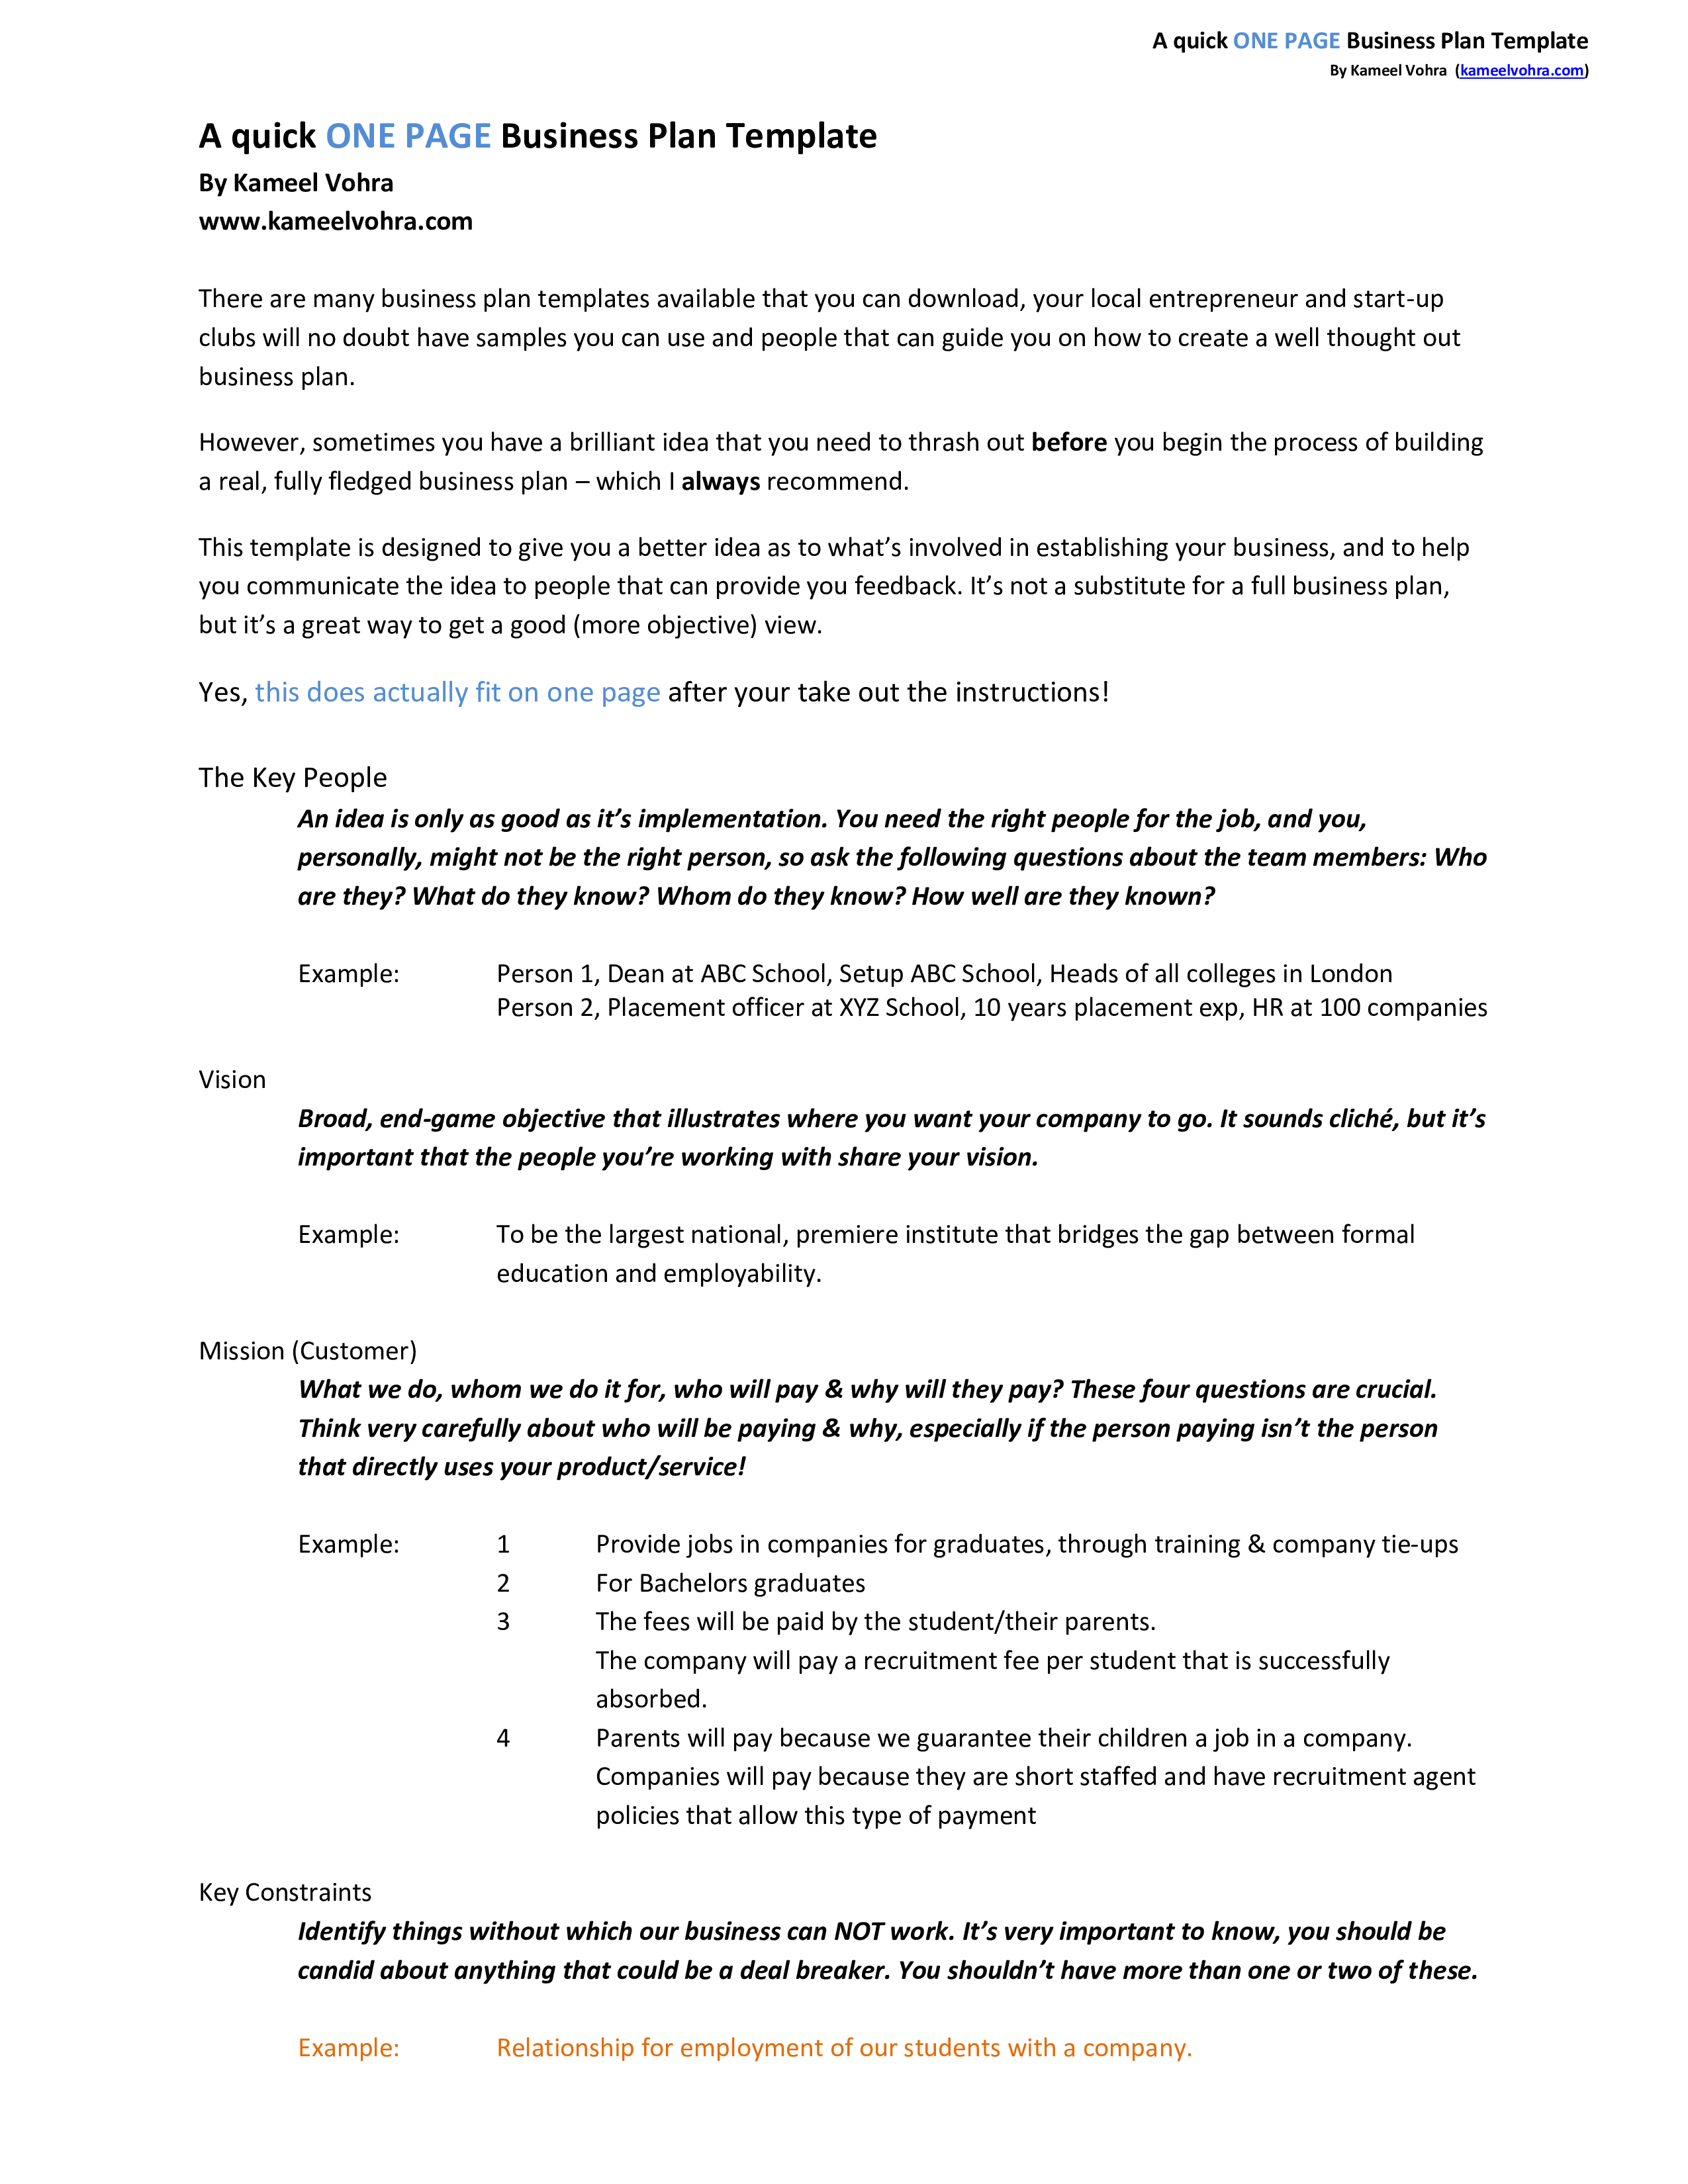 A Quick One Page Business Plan Template - Eloquens Regarding Business Plan Template For Service Company